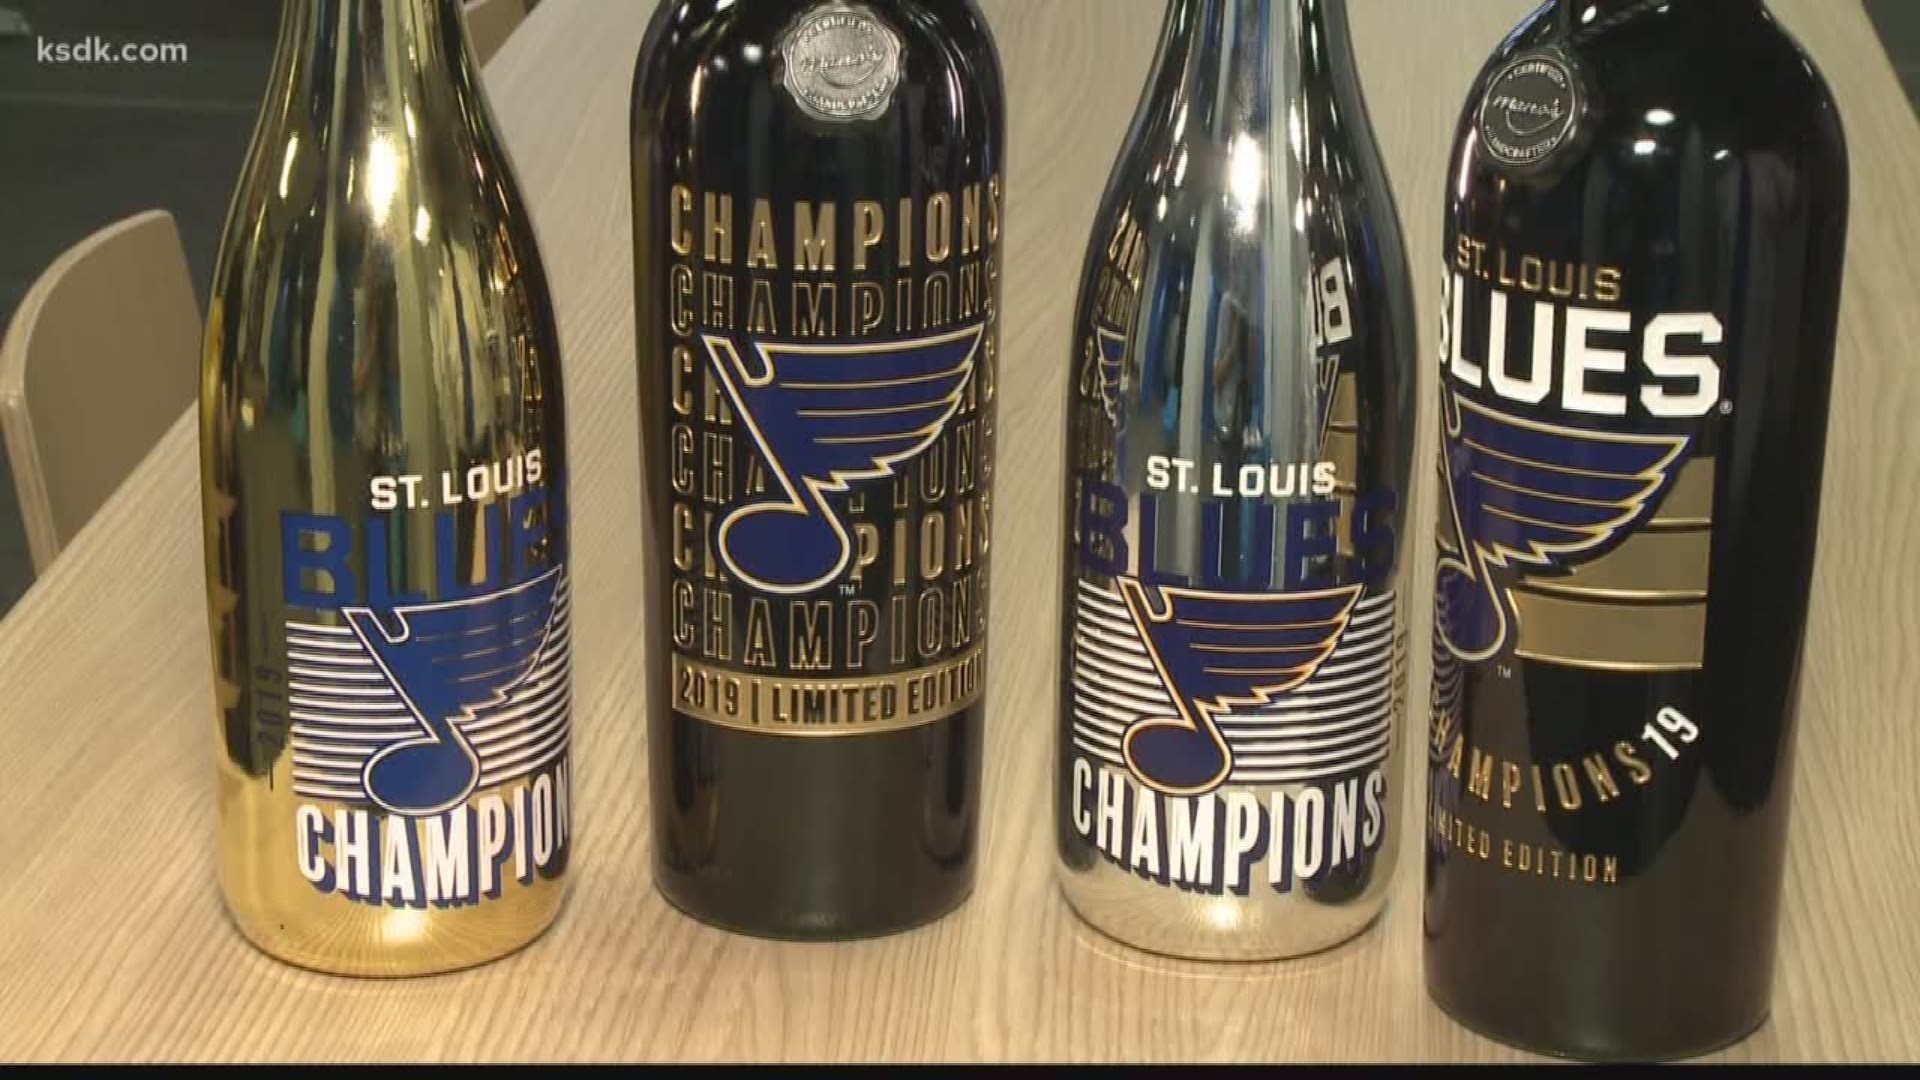 Limited Blues wine and champagne bottles